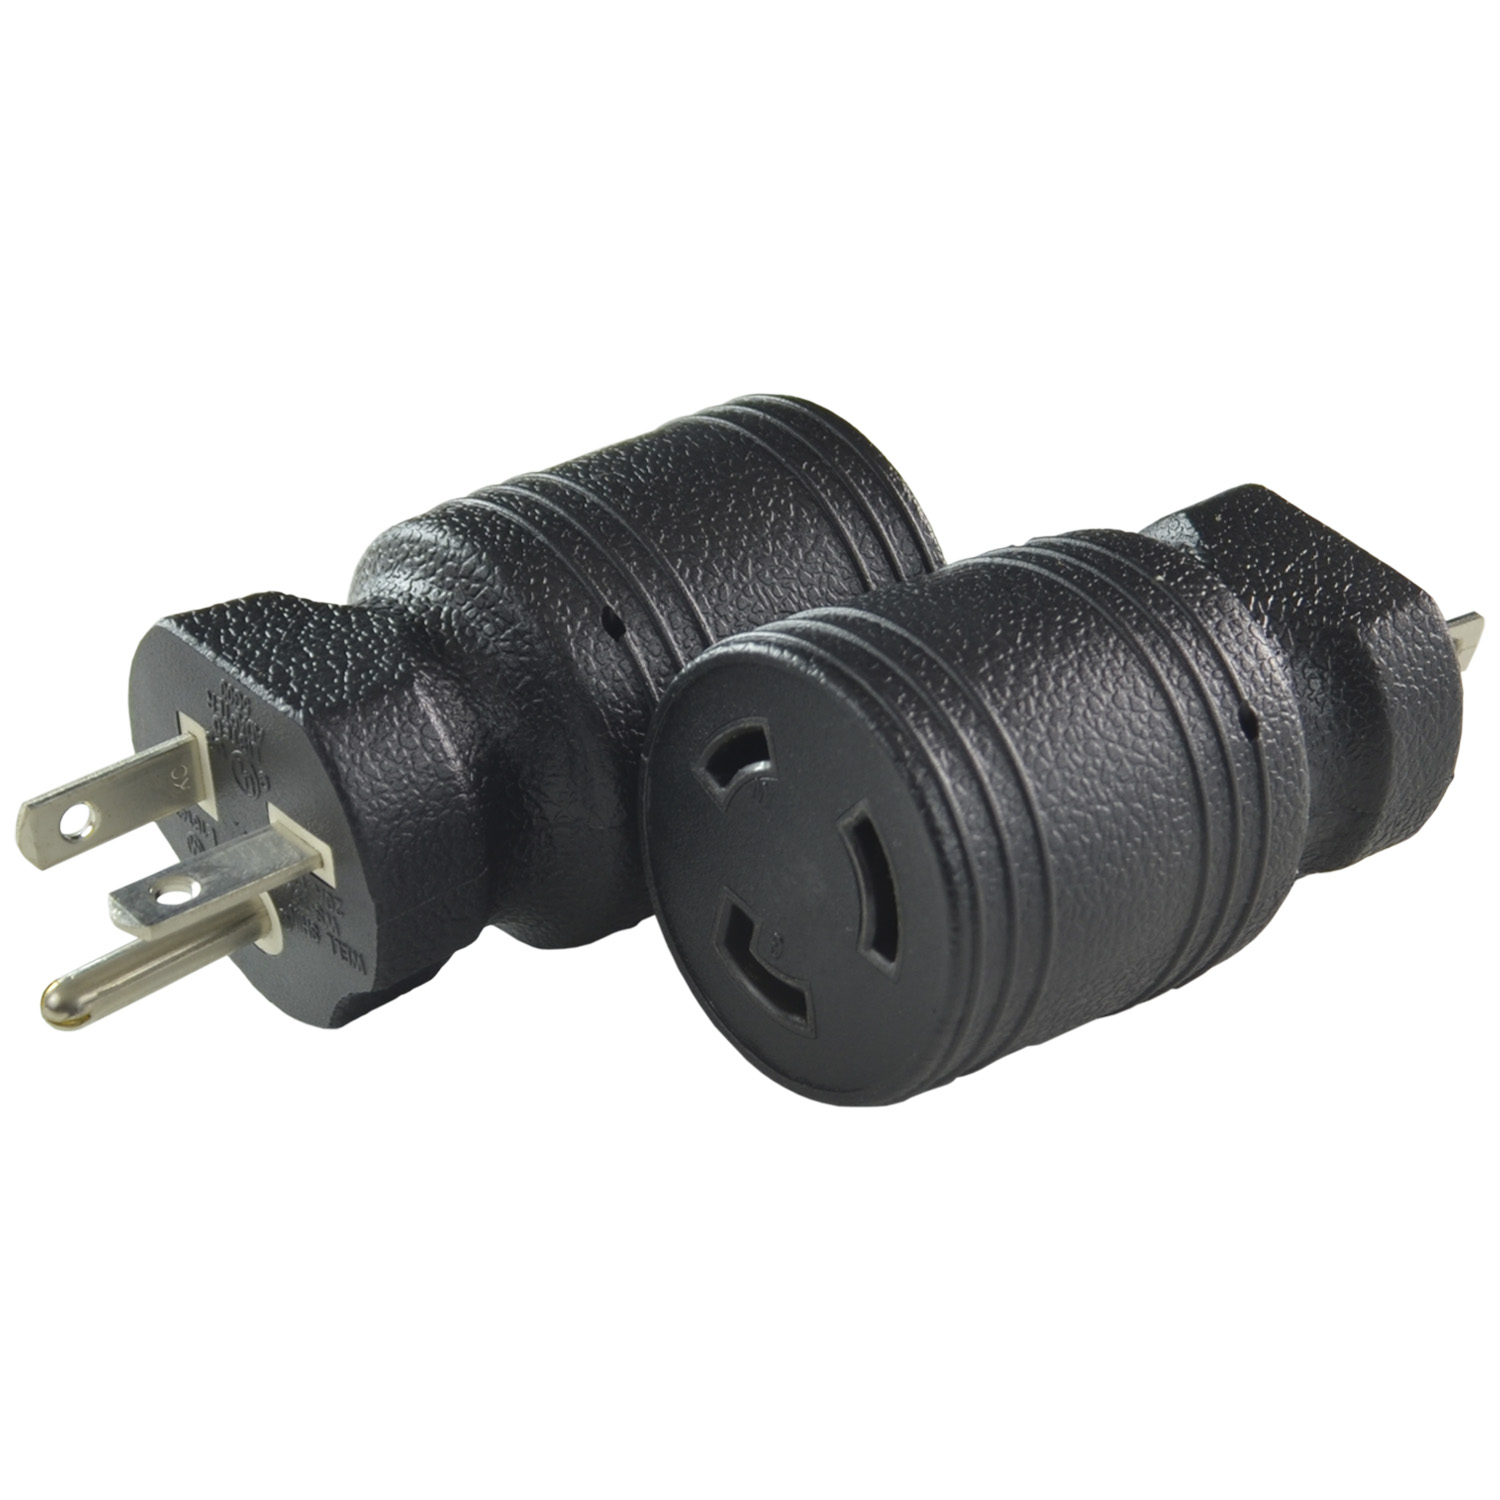 ONLY output 20A 125V Parkworld 885057 Power Adapter cord 3-Prong Generator 20A Locking L5-20P Male Plug to 30 AMP 6-30R Female Receptacle 